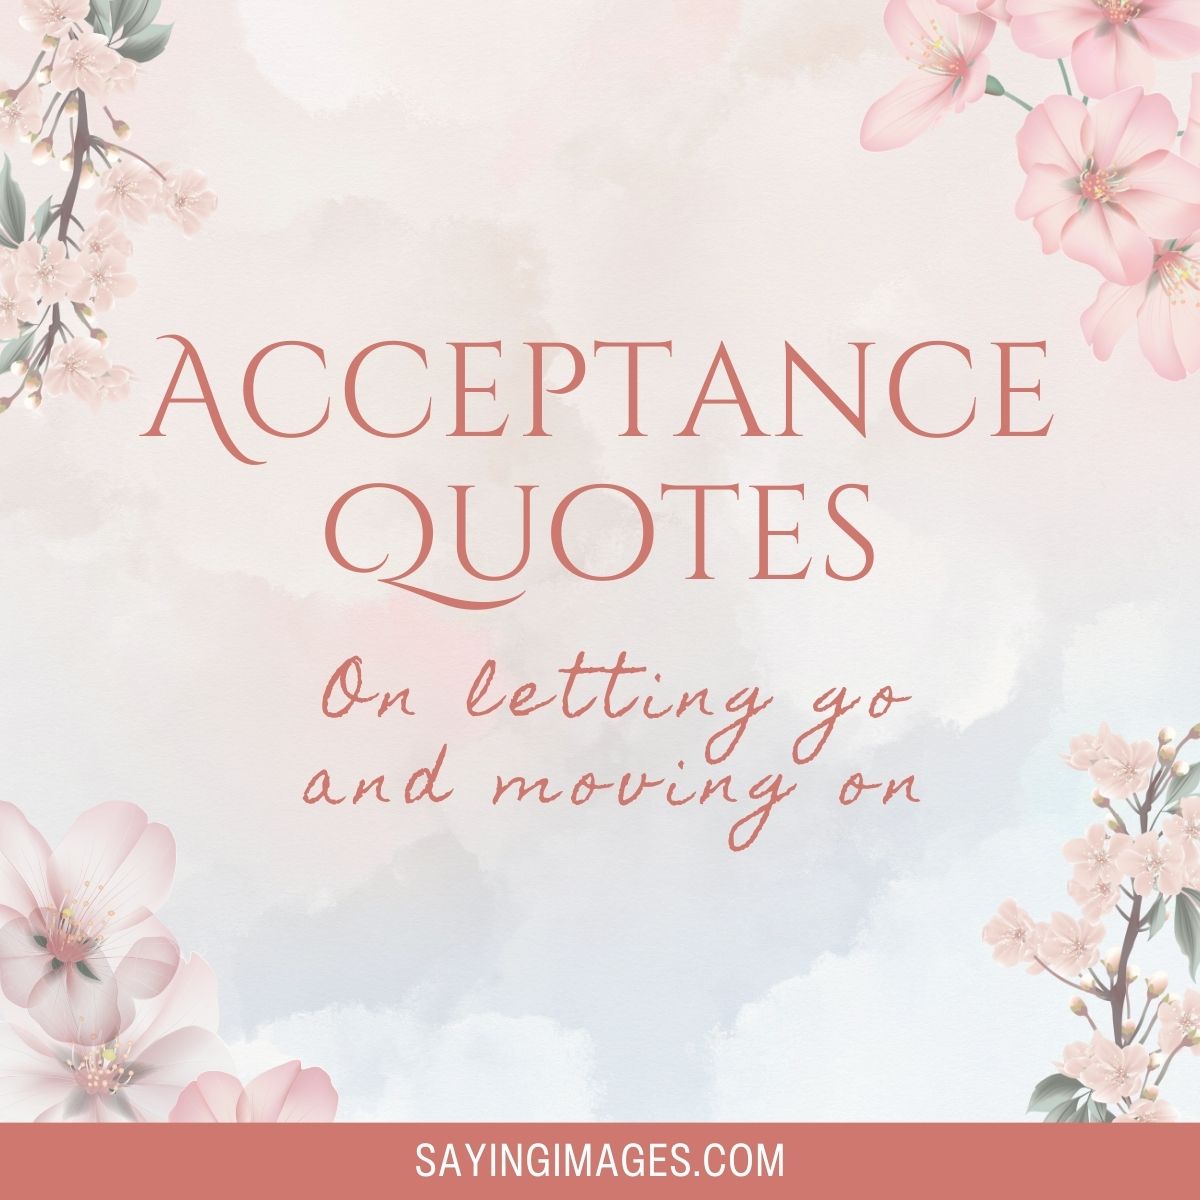 50 Acceptance Quotes on Letting Go and Moving On